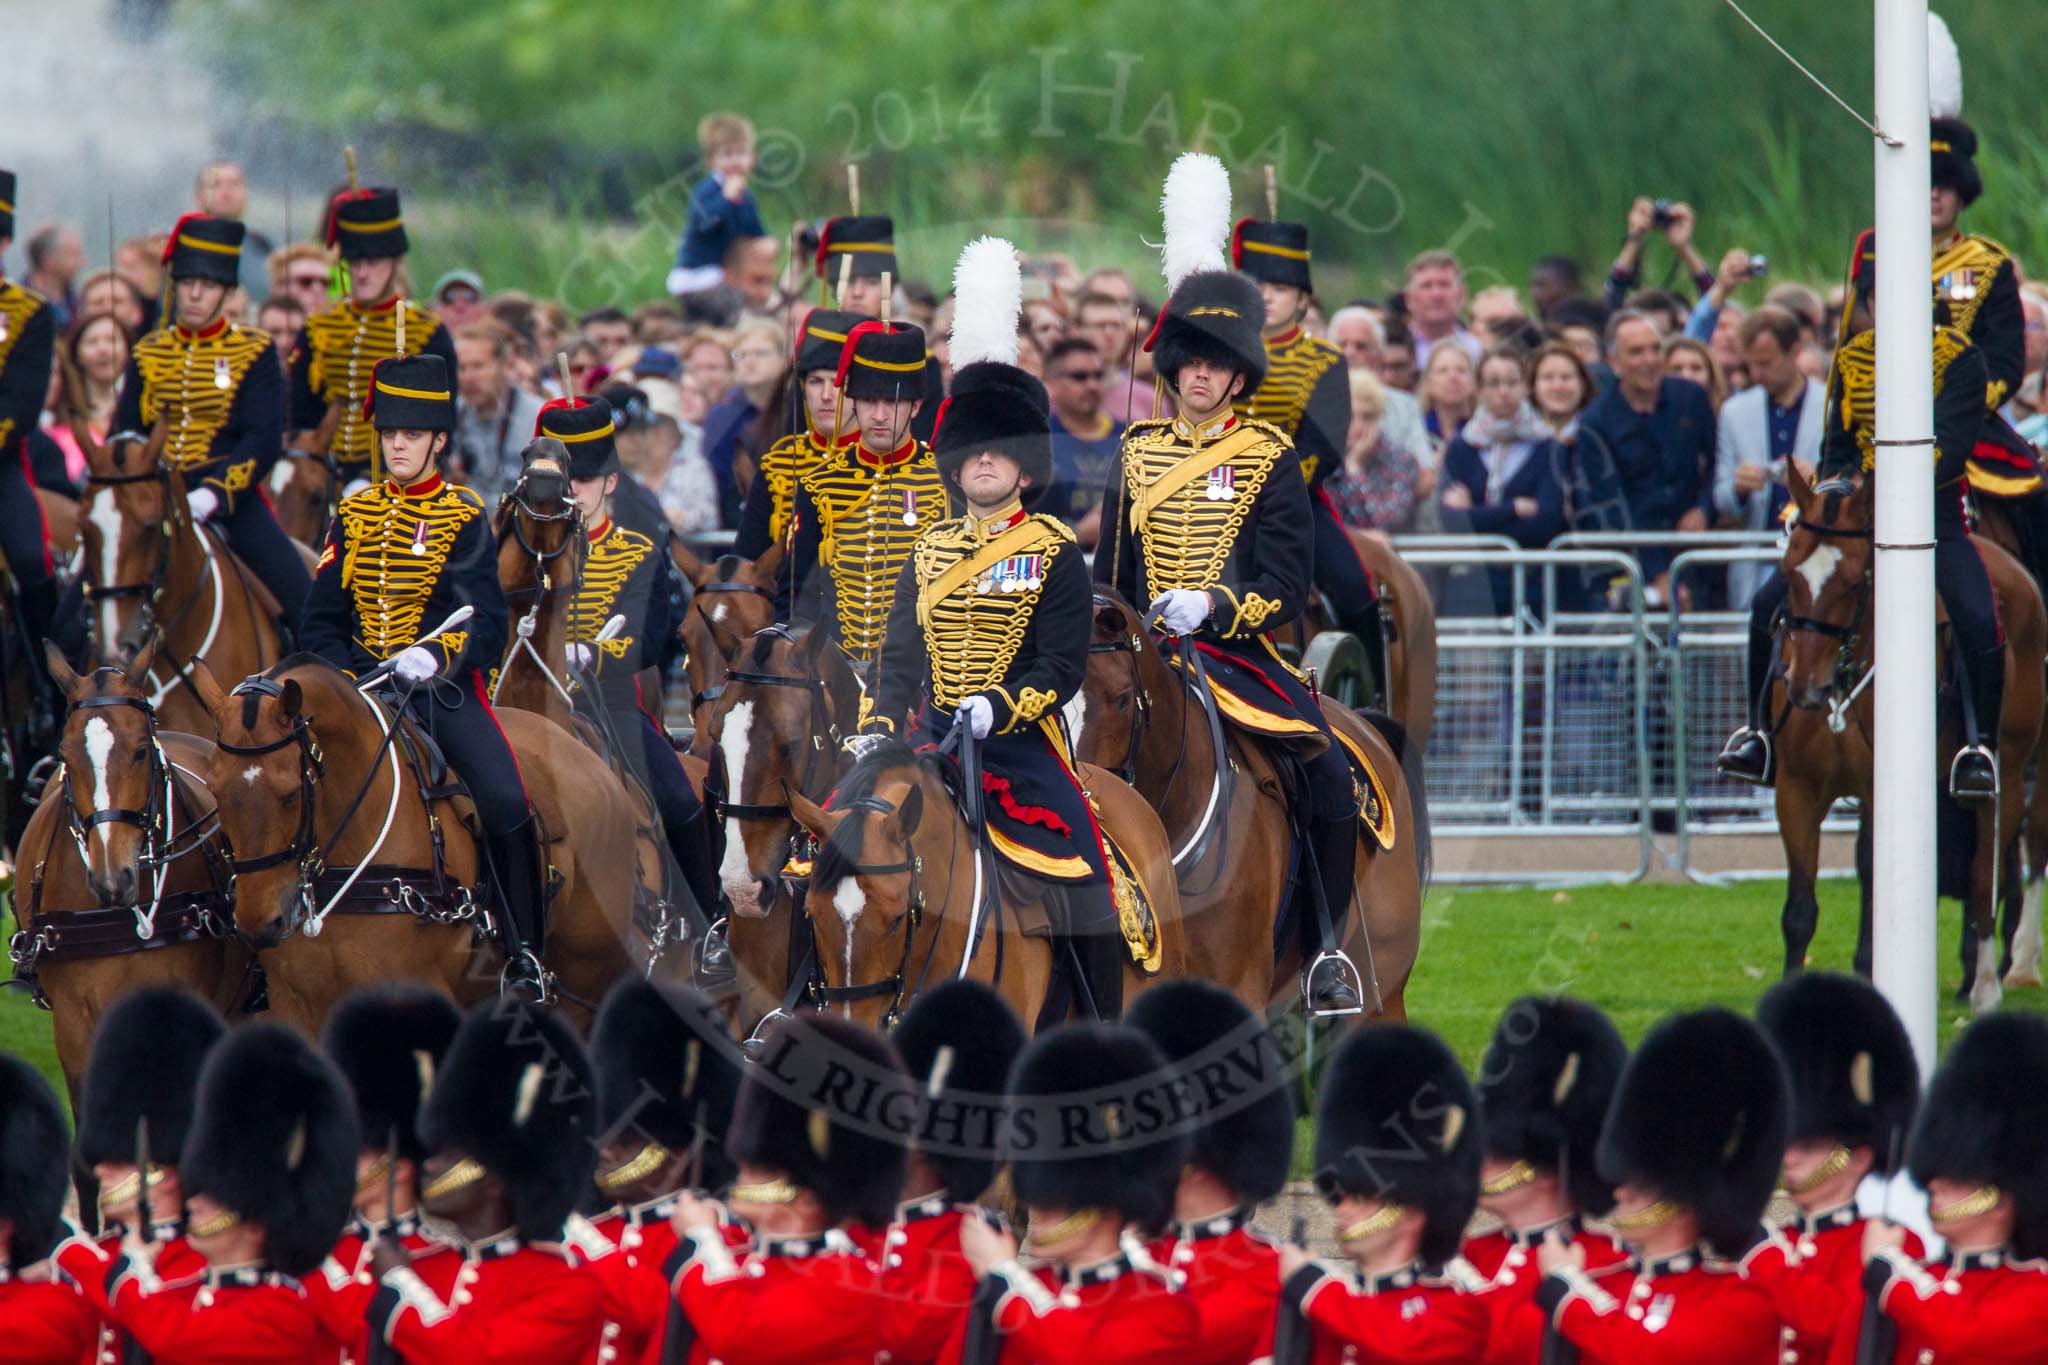 Trooping the Colour 2014.
Horse Guards Parade, Westminster,
London SW1A,

United Kingdom,
on 14 June 2014 at 10:42, image #238